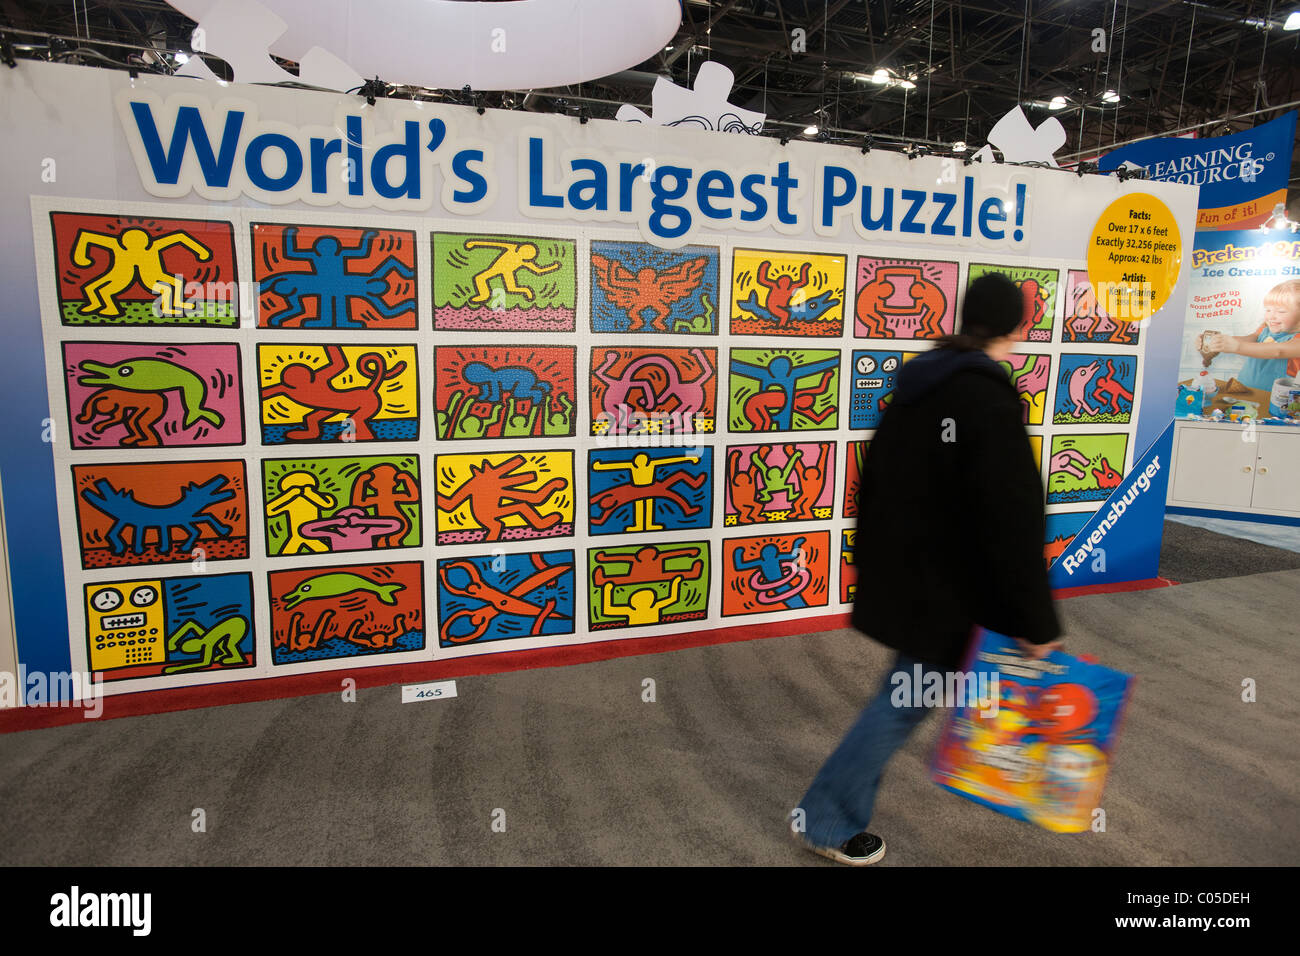 World's largest commercial jigsaw puzzle, entitled "Keith Haring: Double  Retrospect", using Haring's iconic paintings Stock Photo - Alamy